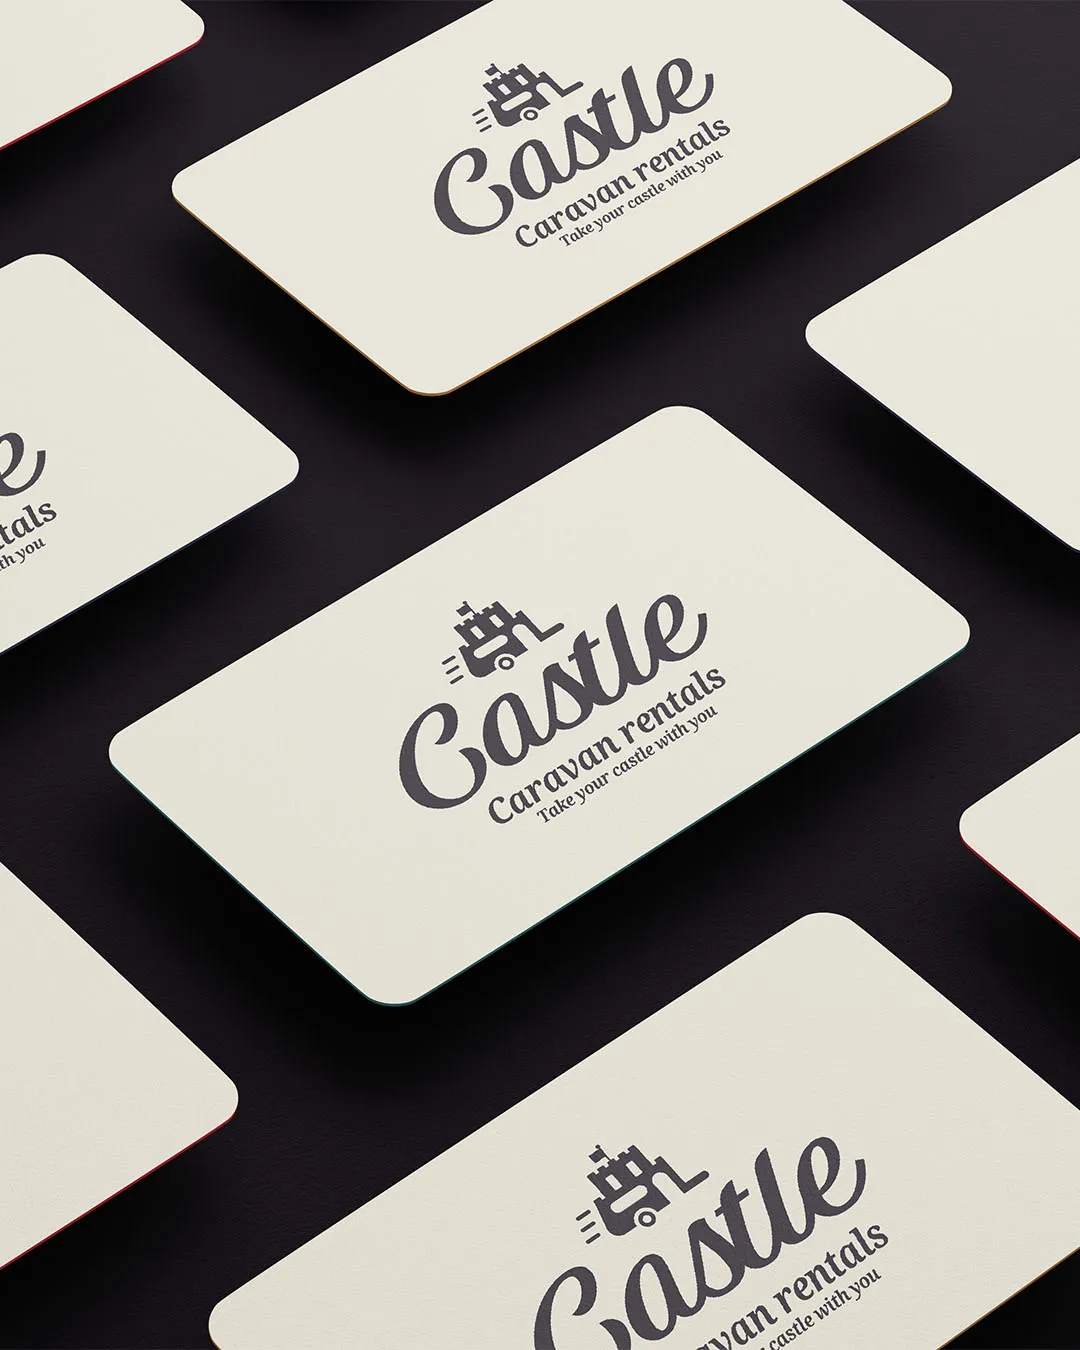 The castle caravans logo displayed on an array of business cards